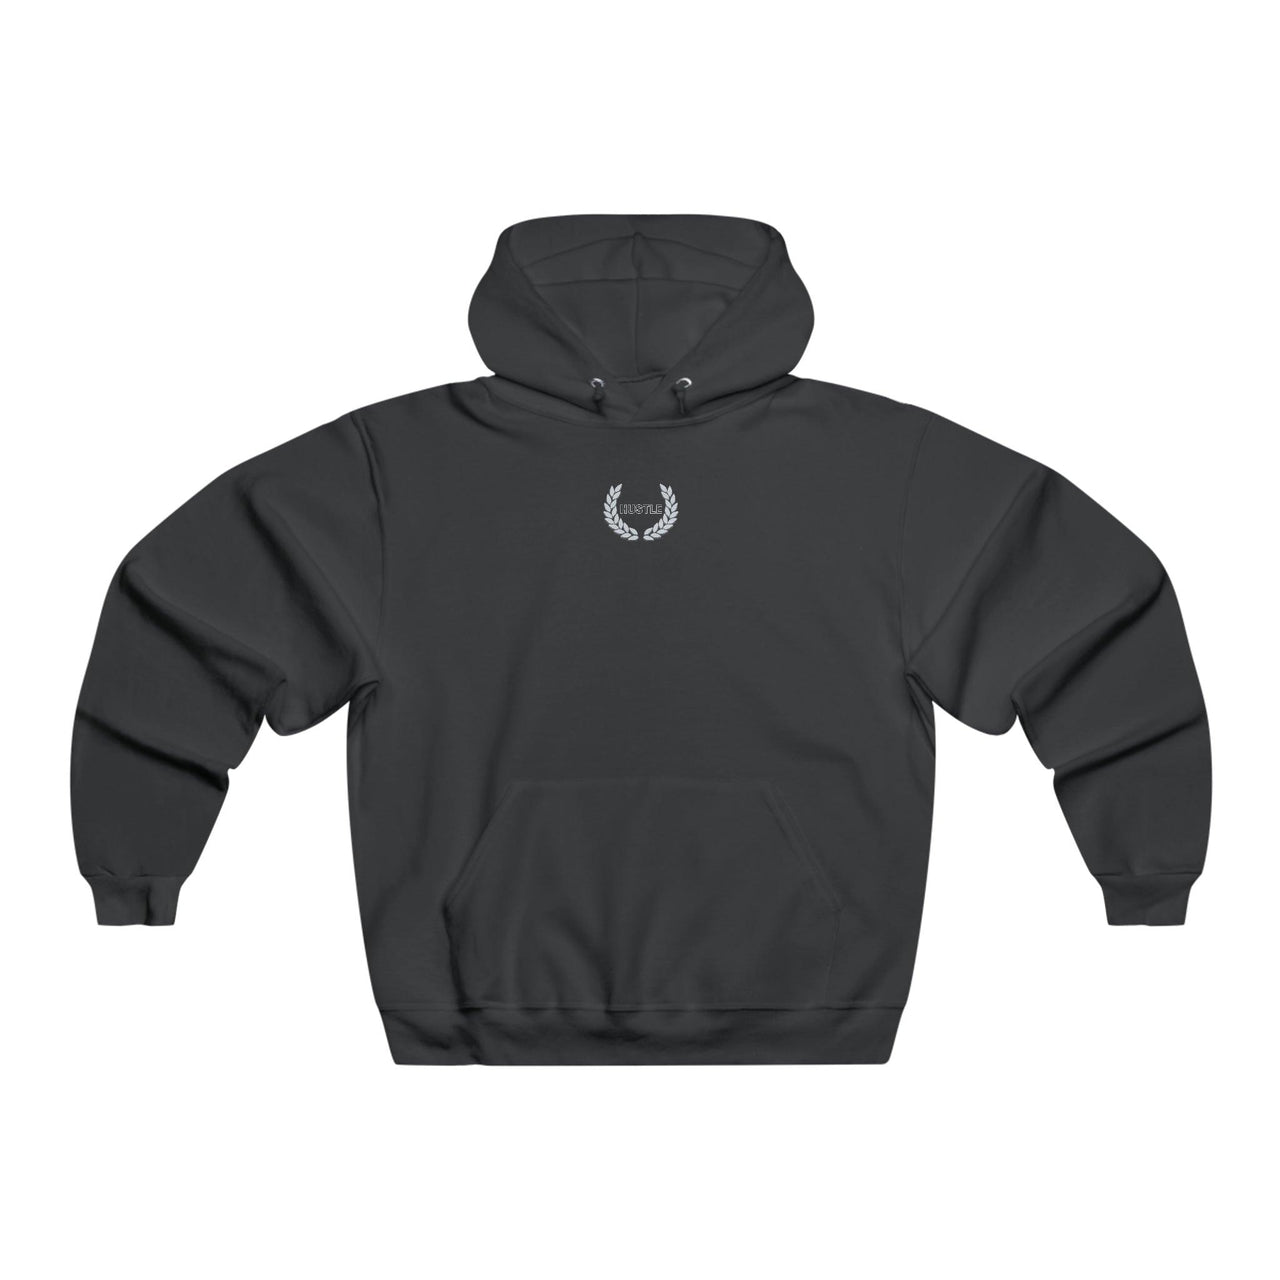 My Unmatched Prespicacity | Andrew Tate Hoodie